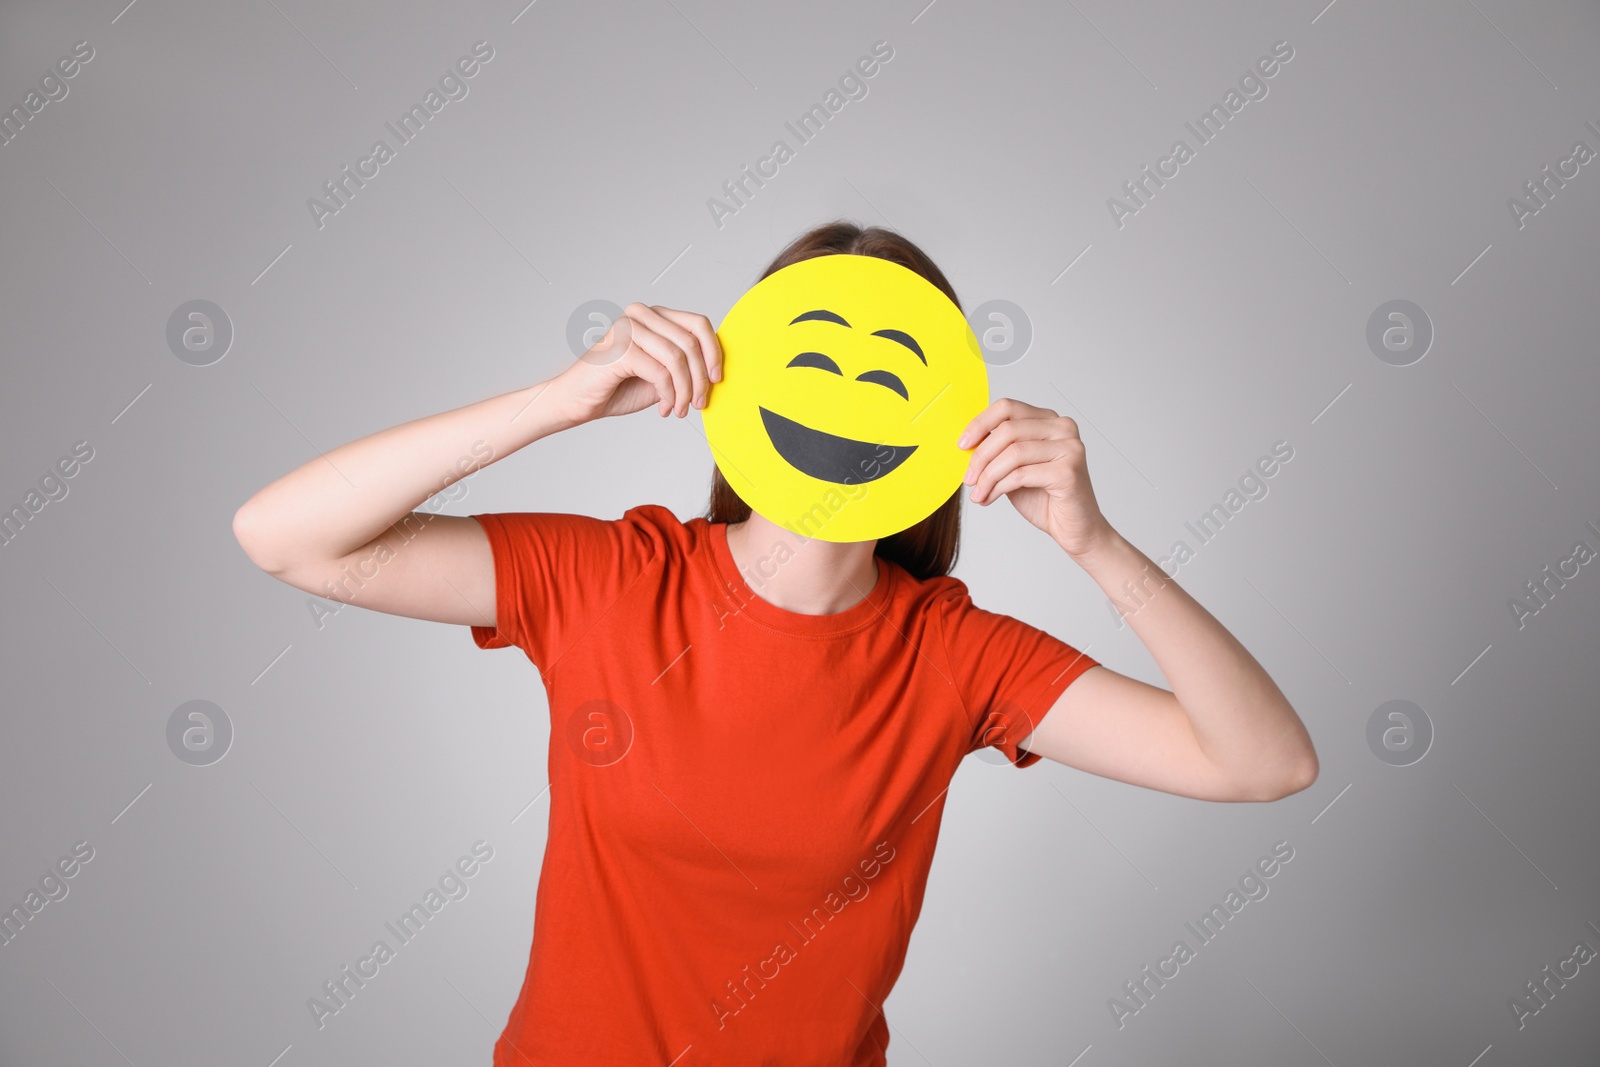 Photo of Woman covering face with laughing emoji on grey background